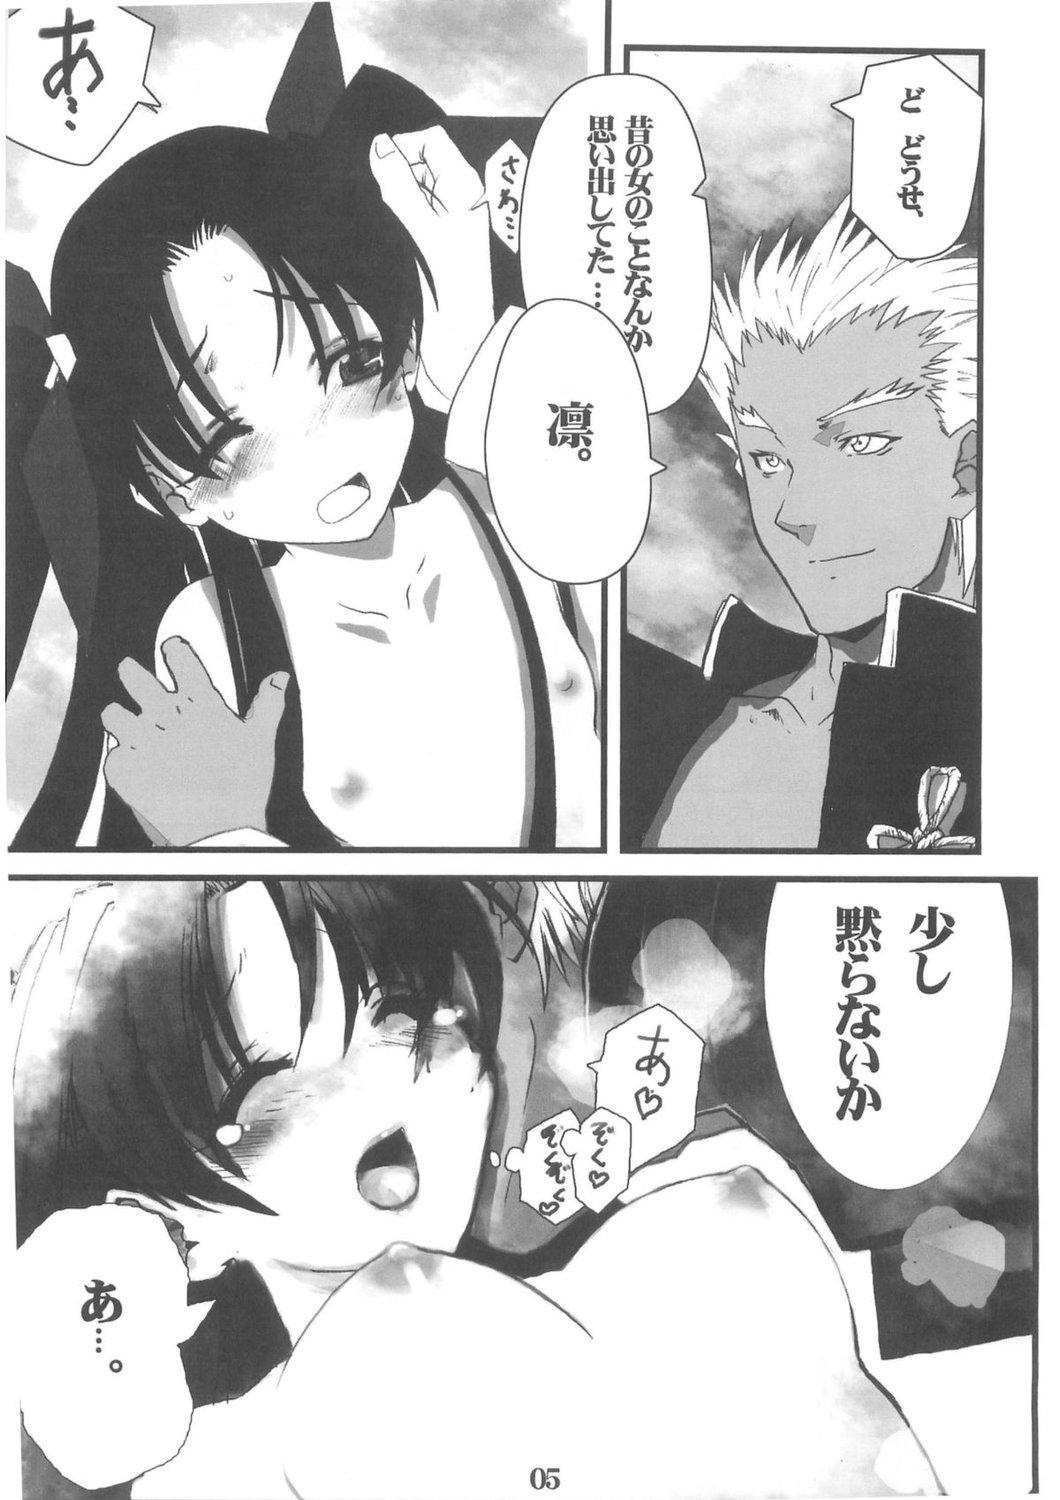 Pov Blow Job Berry Berry - Fate stay night Orgasms - Page 5